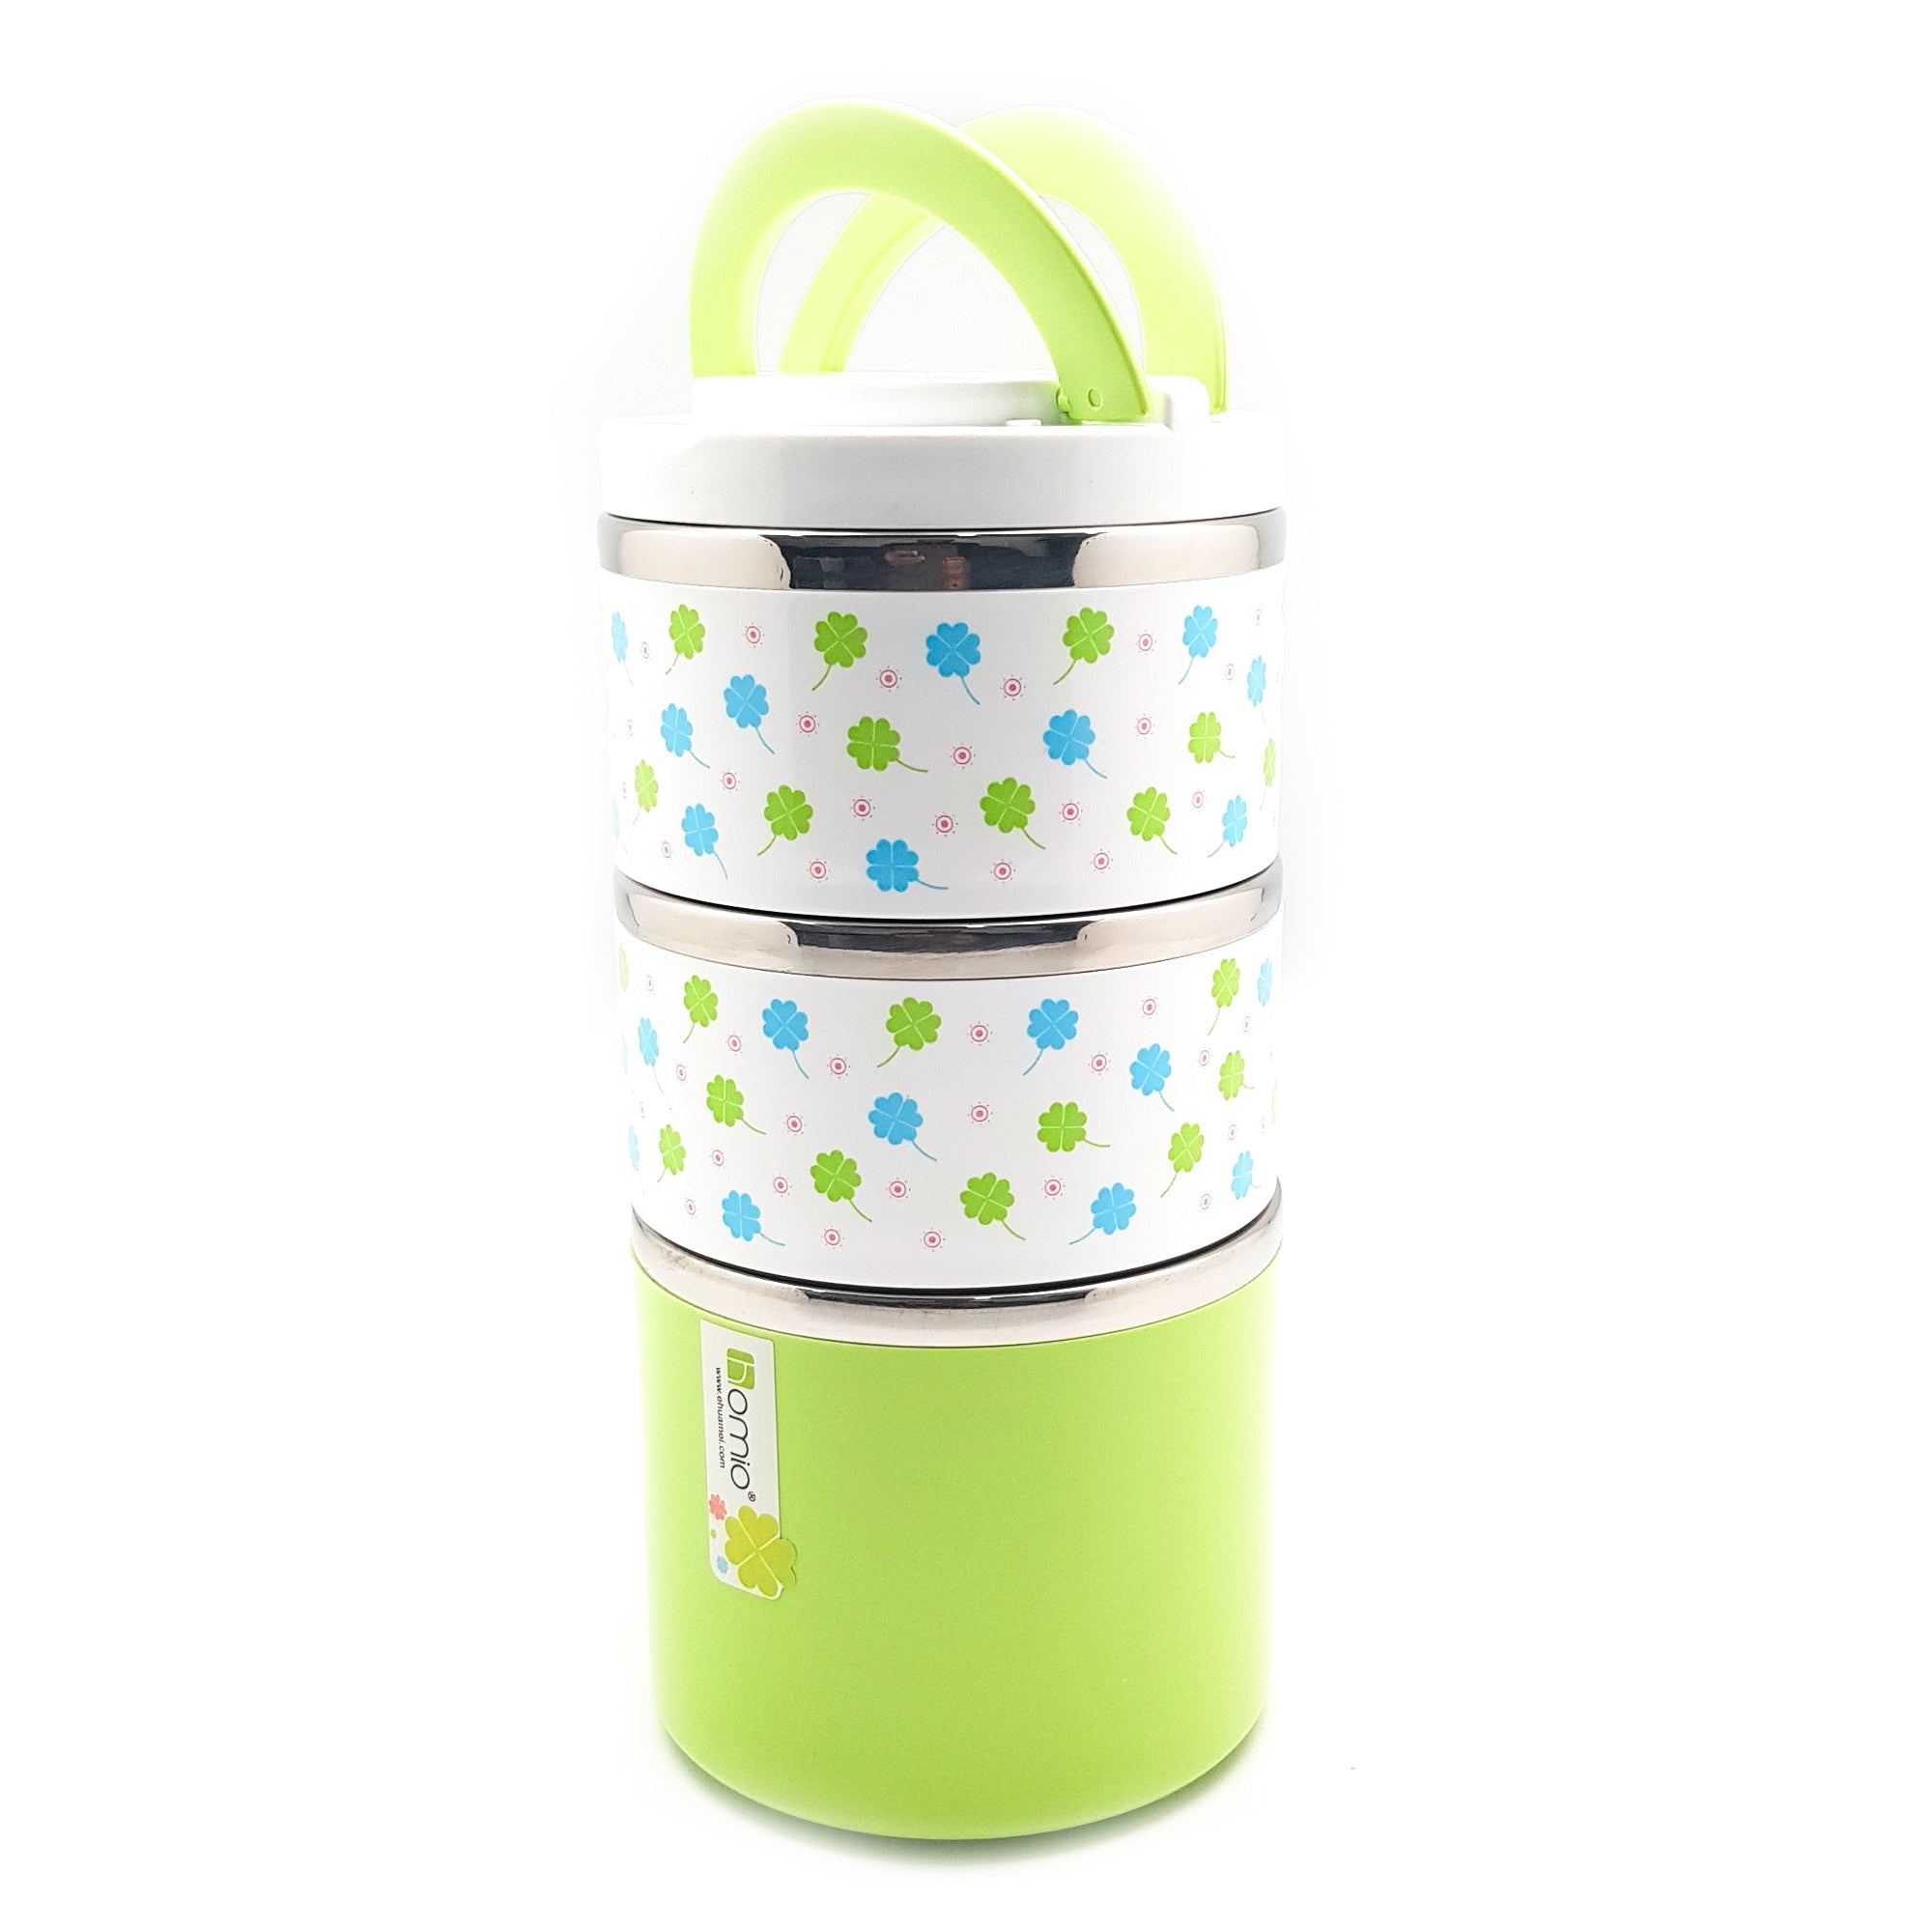 Stainless Steel 3 Layer Storage Insulated Lunch Box 8505